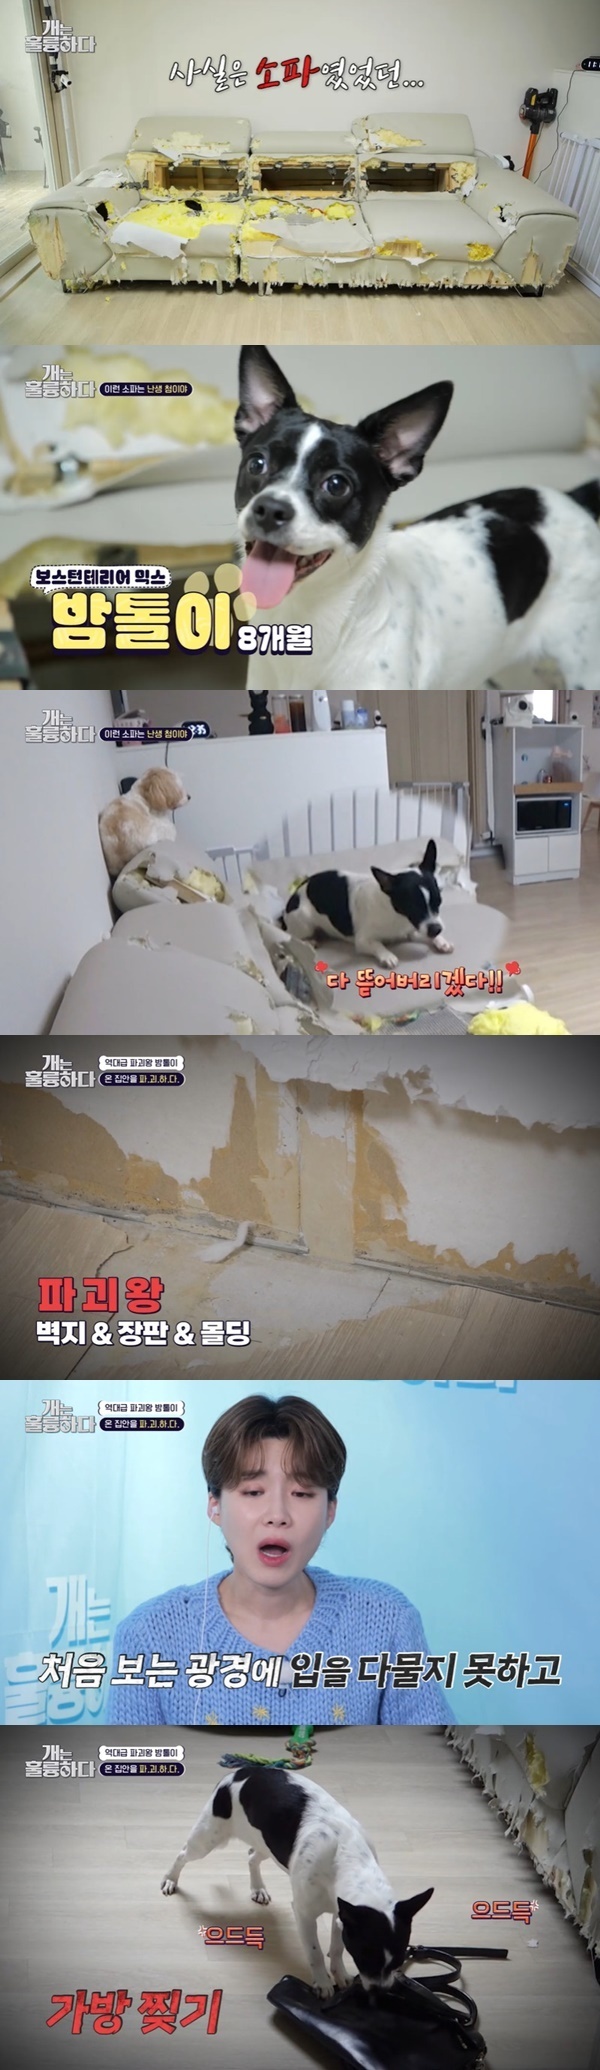 The strangest dog of all time surprised everyone.On March 6, KBS 2TV  ⁇  Dogs Are Incredible  ⁇   ⁇   ⁇   ⁇   ⁇   ⁇ .......................................Even the scorched living room and the hideously torn wallpaper suggested the seriousness of the problem: the once-Sofa was in the living room, and the Guardian was the first to see the inside of  ⁇ Sofa.This is what it looks like. Ive never thought about it before.Kang Hyung-wook responded that it was strange, and Lee Kyung-gyu said that it would be absurd at the company that sold Sofa.Jang Doyeon said, I do not think I can recognize Sofa in the company that sold Sofa. I do not have life in Sofa, but I was sick and I was saddened.The Guardian likes to rip off the Boston Terrier Mix (8 months). I could have sat there a few days ago, but there is only one here.I think I should write it as a real backrest, and Sofa said that it is disappearing day by day.The Guardian bought all the toys, saying that they do not play with them, but they have red and blue threads on their bowels.I bought the stairs, but when I ate the stairs, when I reached the chair, I ate the chair, and when I ate the rice and tried to clean it, I explained that there was no garbage.There is no problem with the health of the chestnut. The Guardian said that he went to the hospital and said that there was no problem because of his digestive ability.When the production team suggested a way to clean up the house, the Guardian replied, There is nothing more to clean up now.The Guardian rescued a kid from a dog farm and gave him temporary protection at first.The house was broken and I ran away, he said. I did not go under the sink and it was really bad. Guardian adopted a chestnut at the dog center for the sake.The problem of separation anxiety as well as grotesque eating was heard from the 11th floor to the 1st floor because the Guardian did not stop howling when he was away.Kang Hyung-wook is a life that needs to be exercised. There is a child who needs to keep something in his mouth and needs to be torn, he suggested as one of the problem-solving methods.